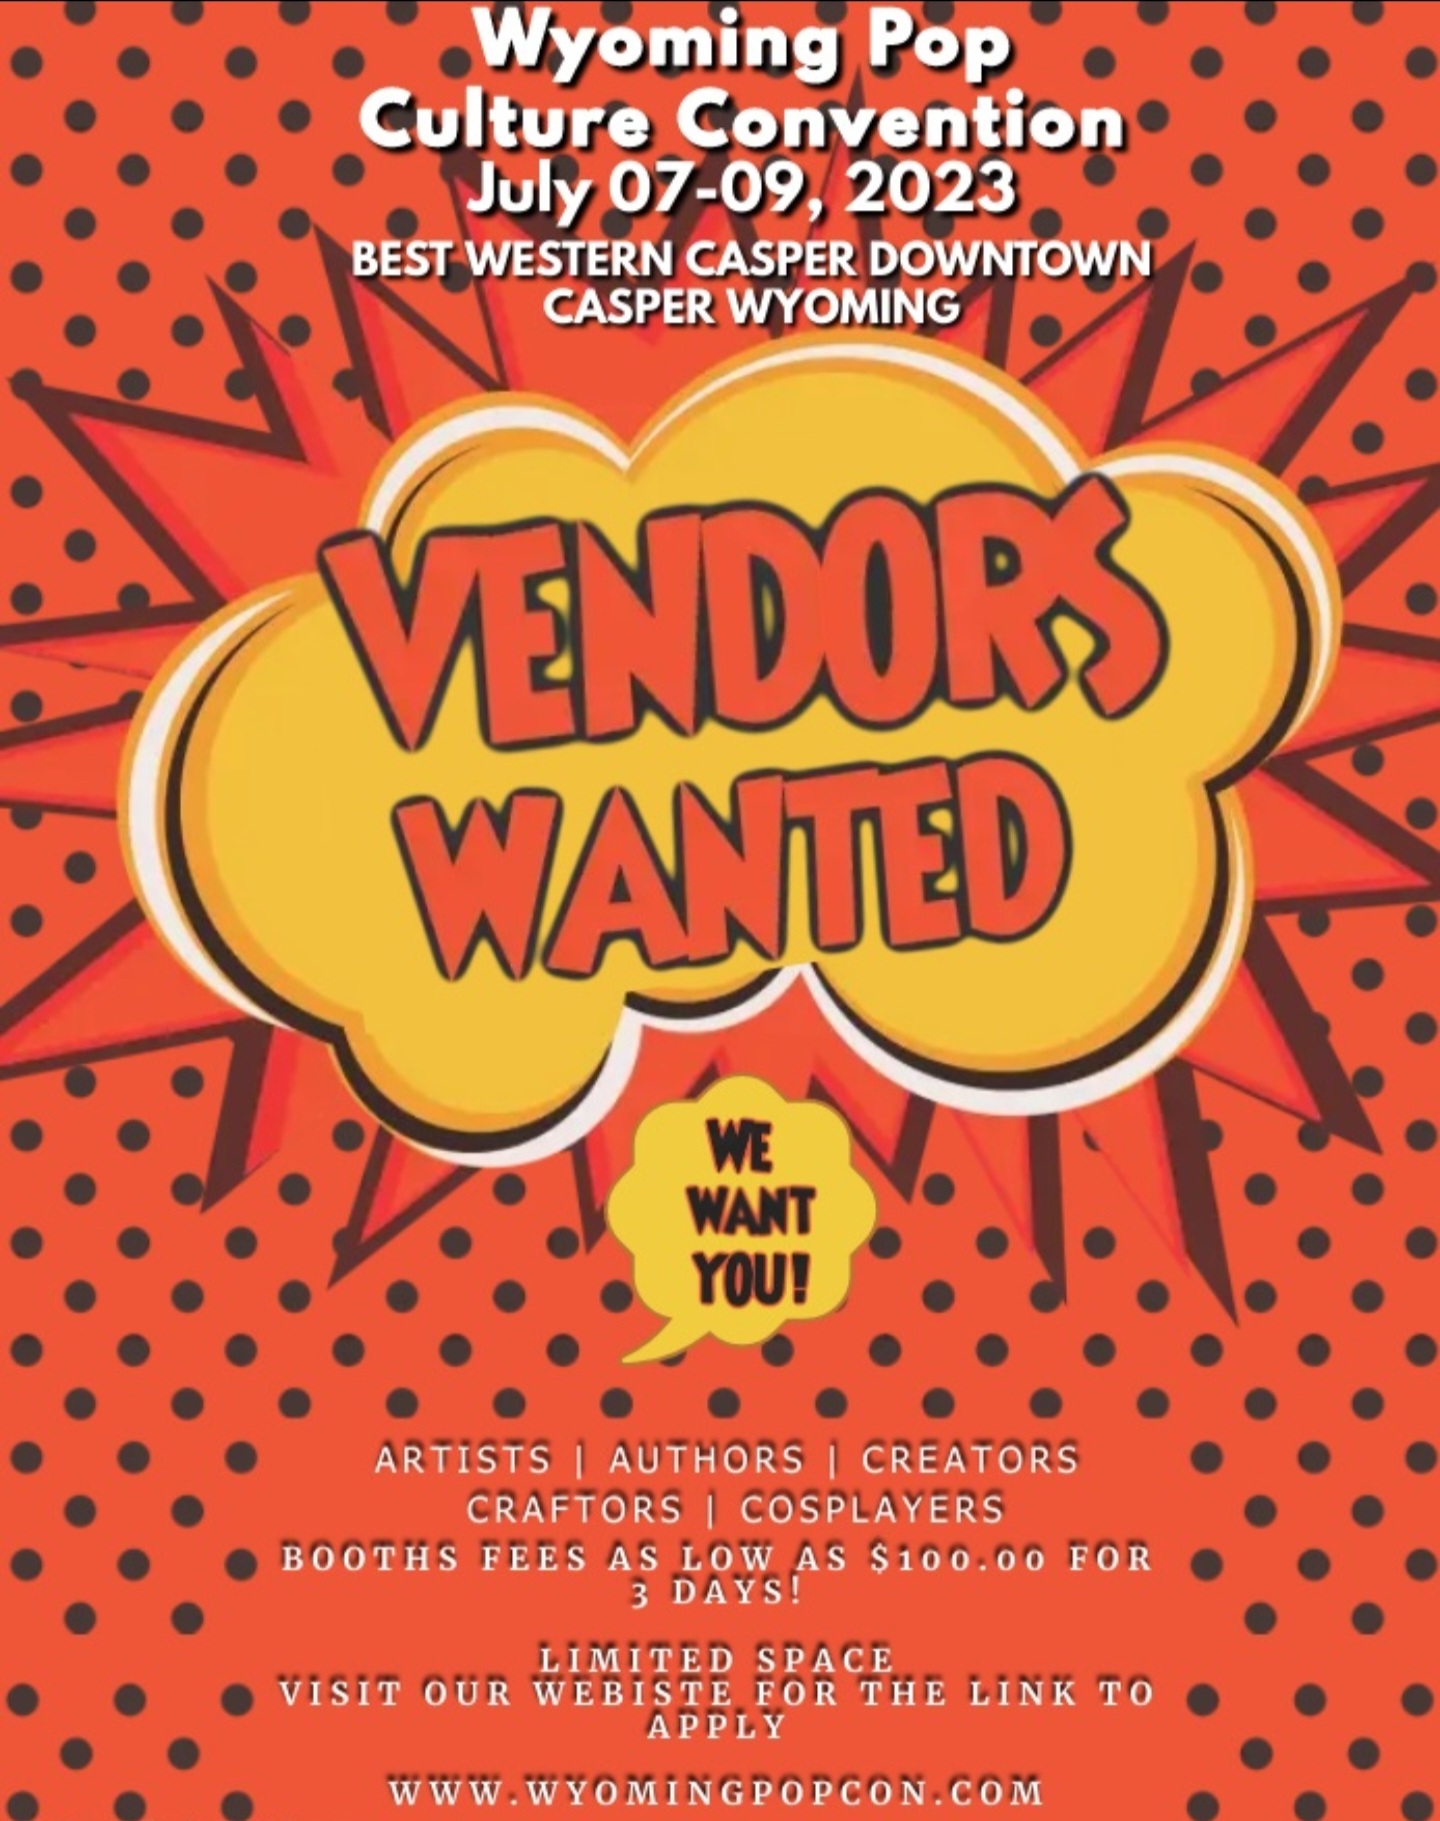 VENDORS click here for booths